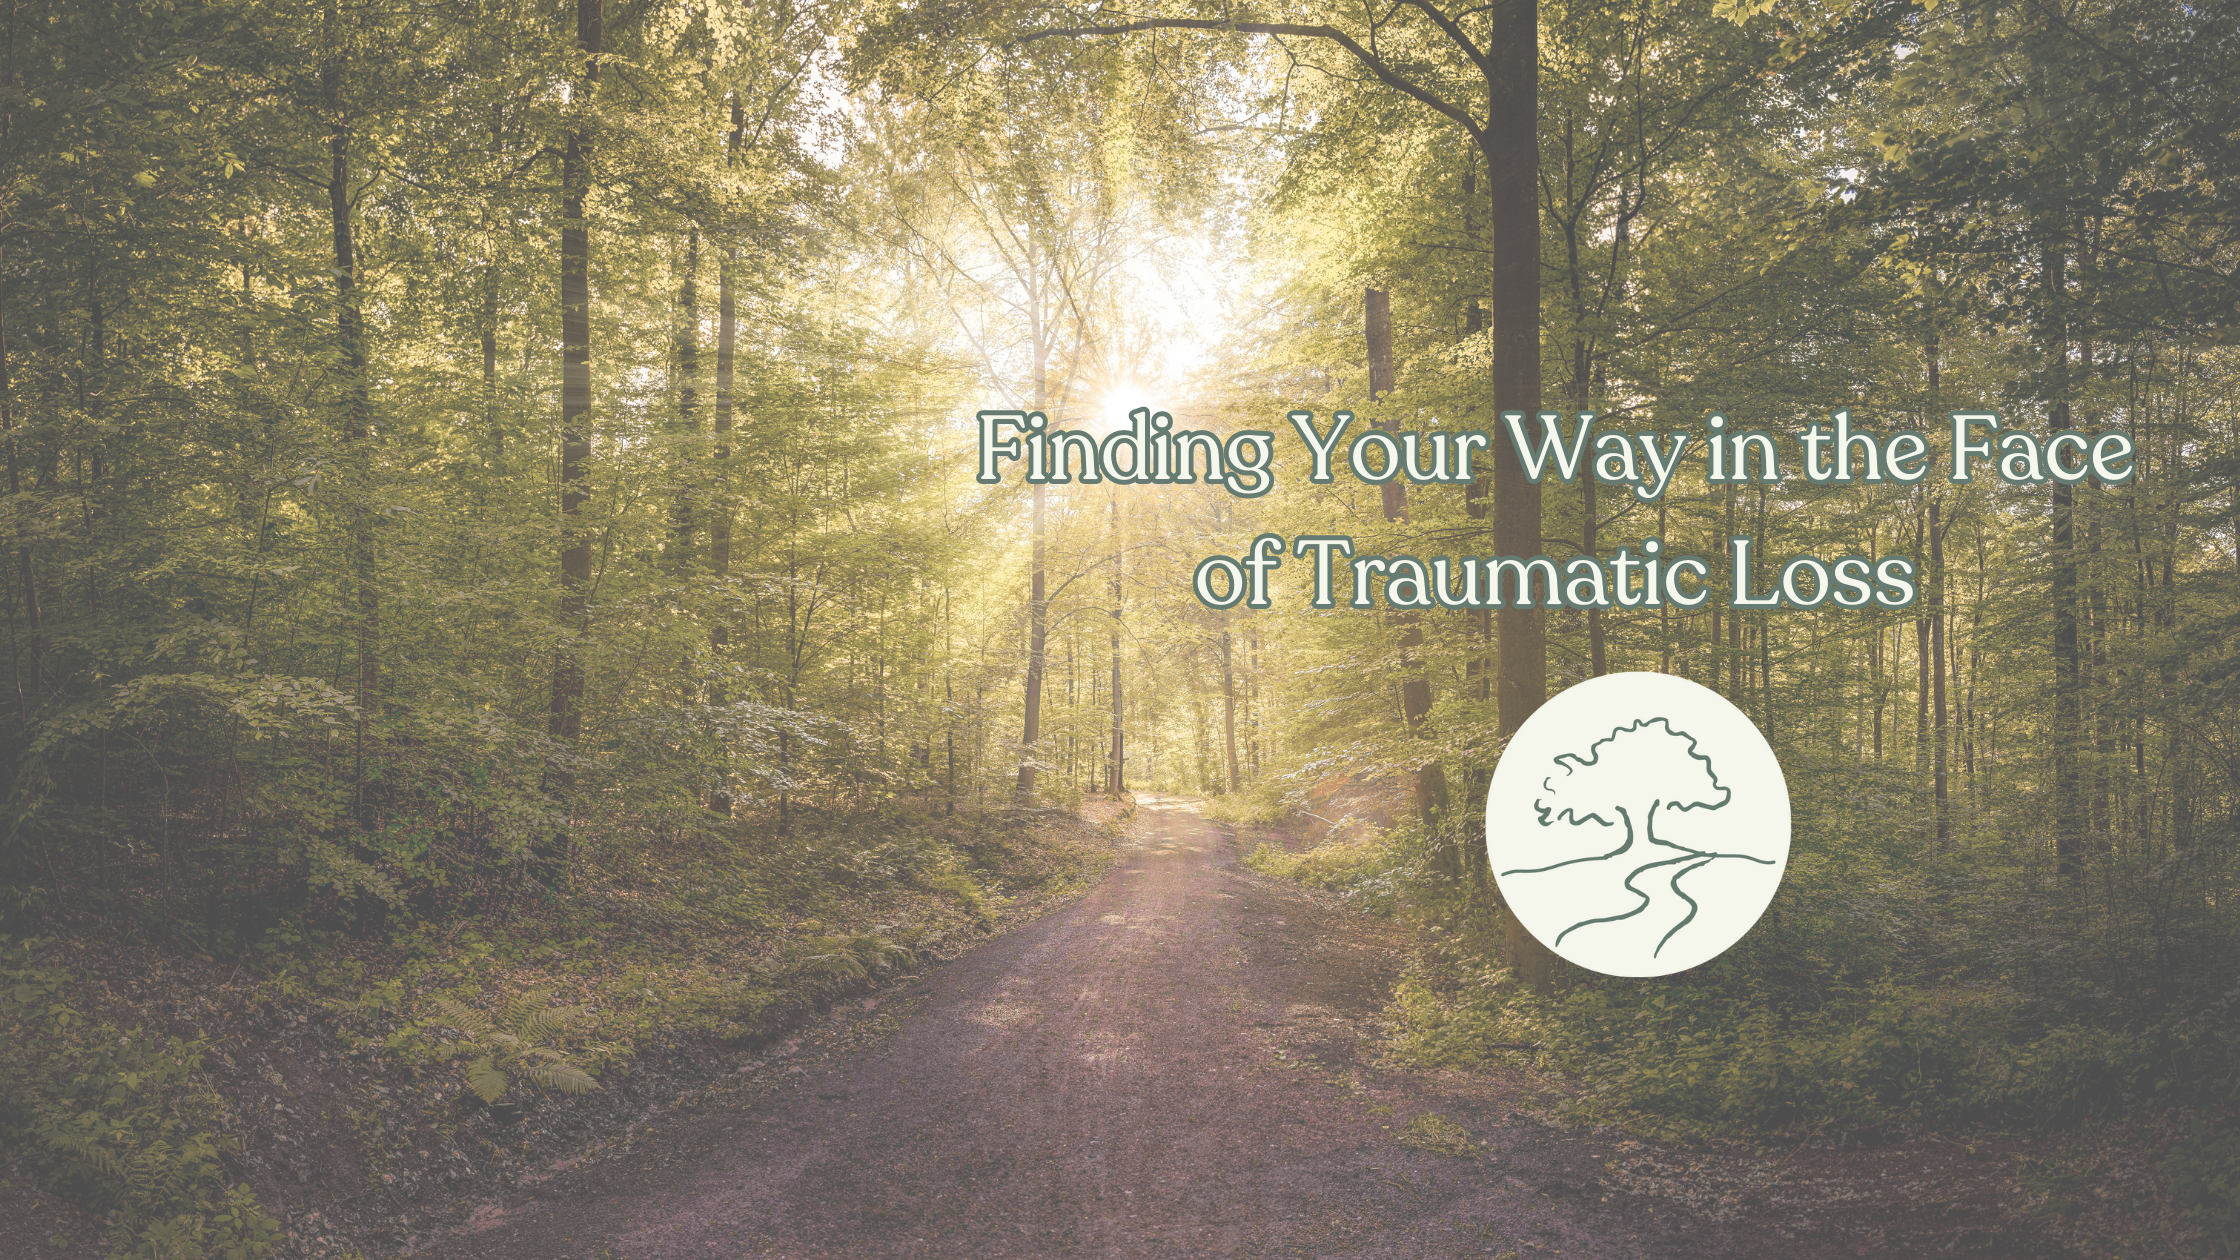 Find Your Way in the face of traumatic loss